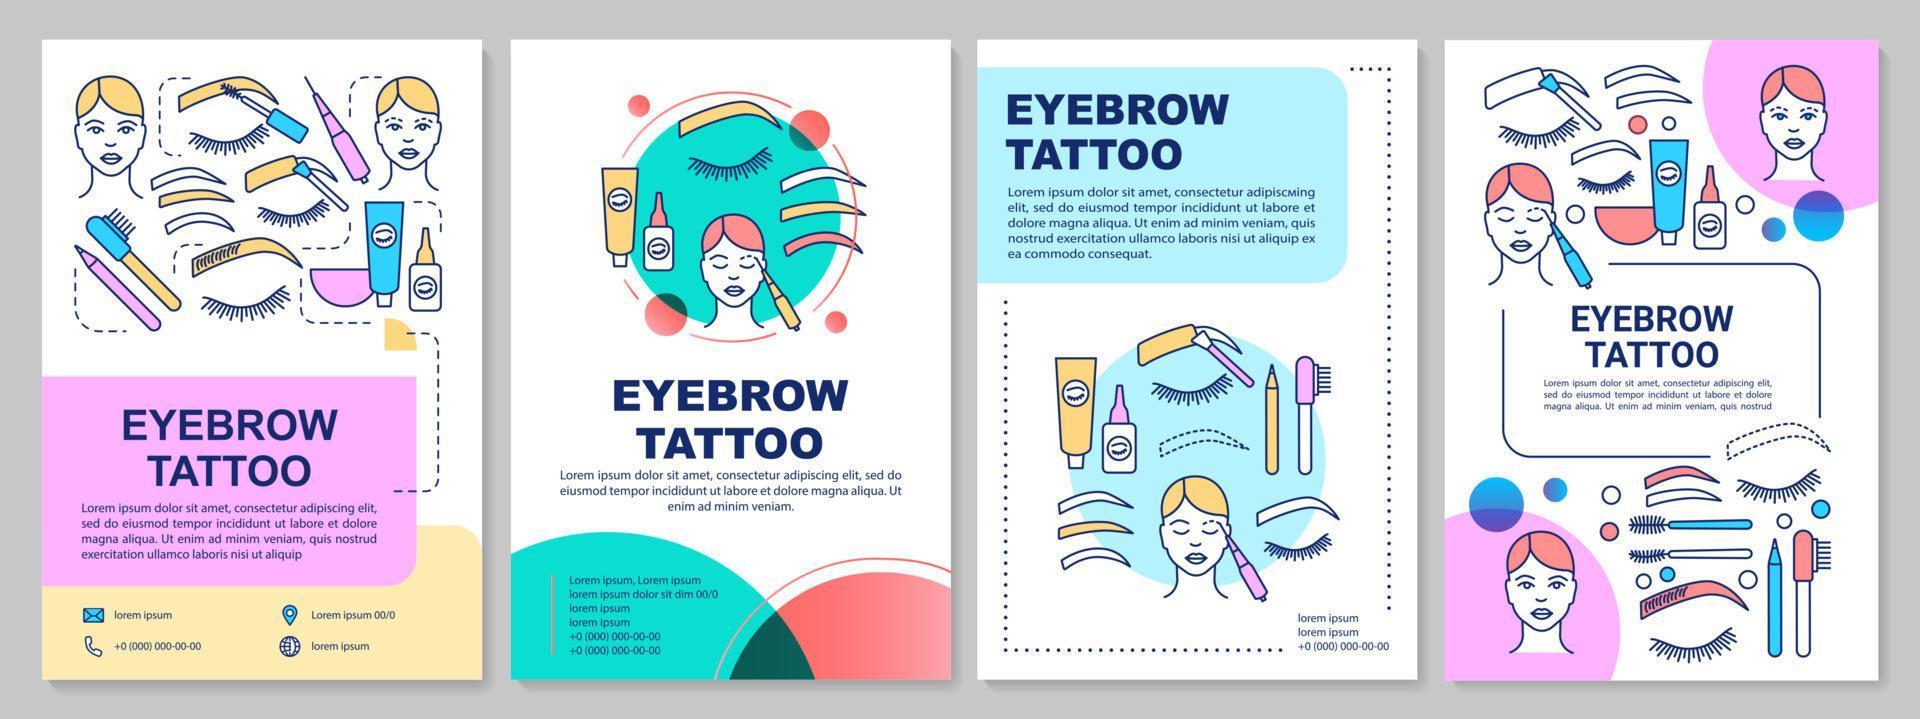 Eyebrow tattoo brochure template layout. Permanent makeup. Flyer, booklet, leaflet print design with linear illustrations. Vector page layouts for magazines, annual reports, advertising posters